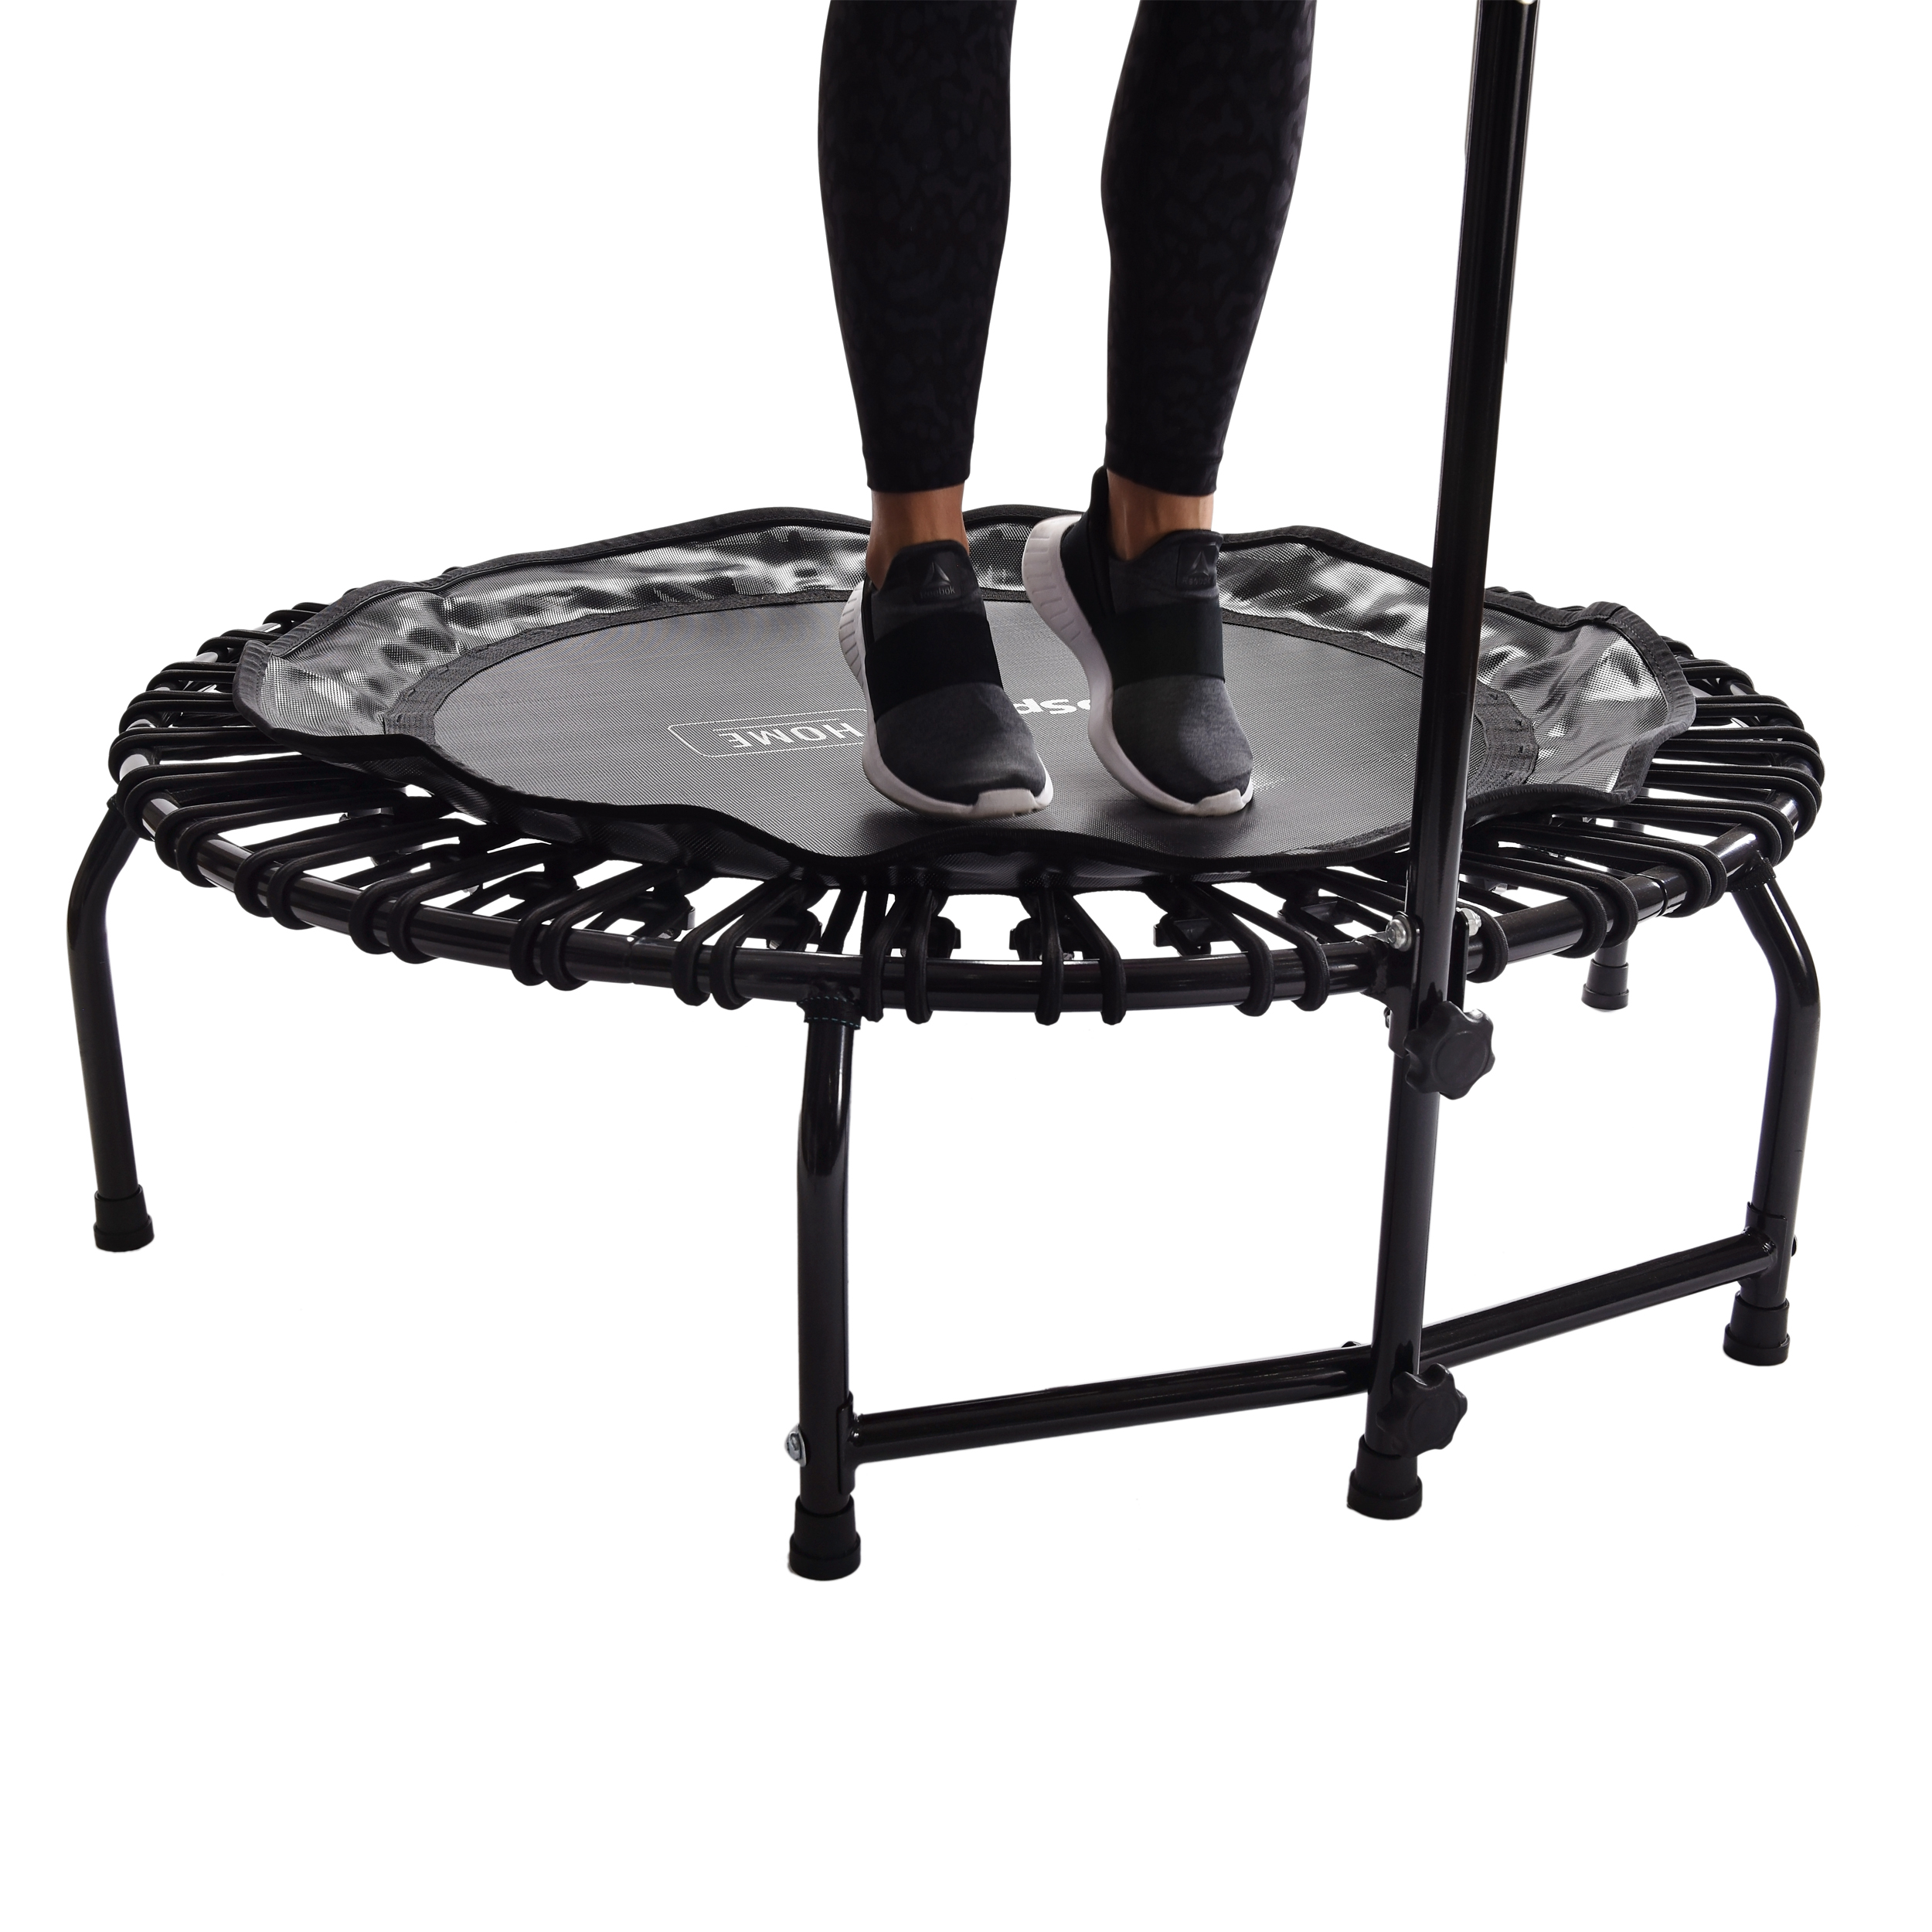 JumpSport Home 120 Fitness Trampoline - Stamina Products